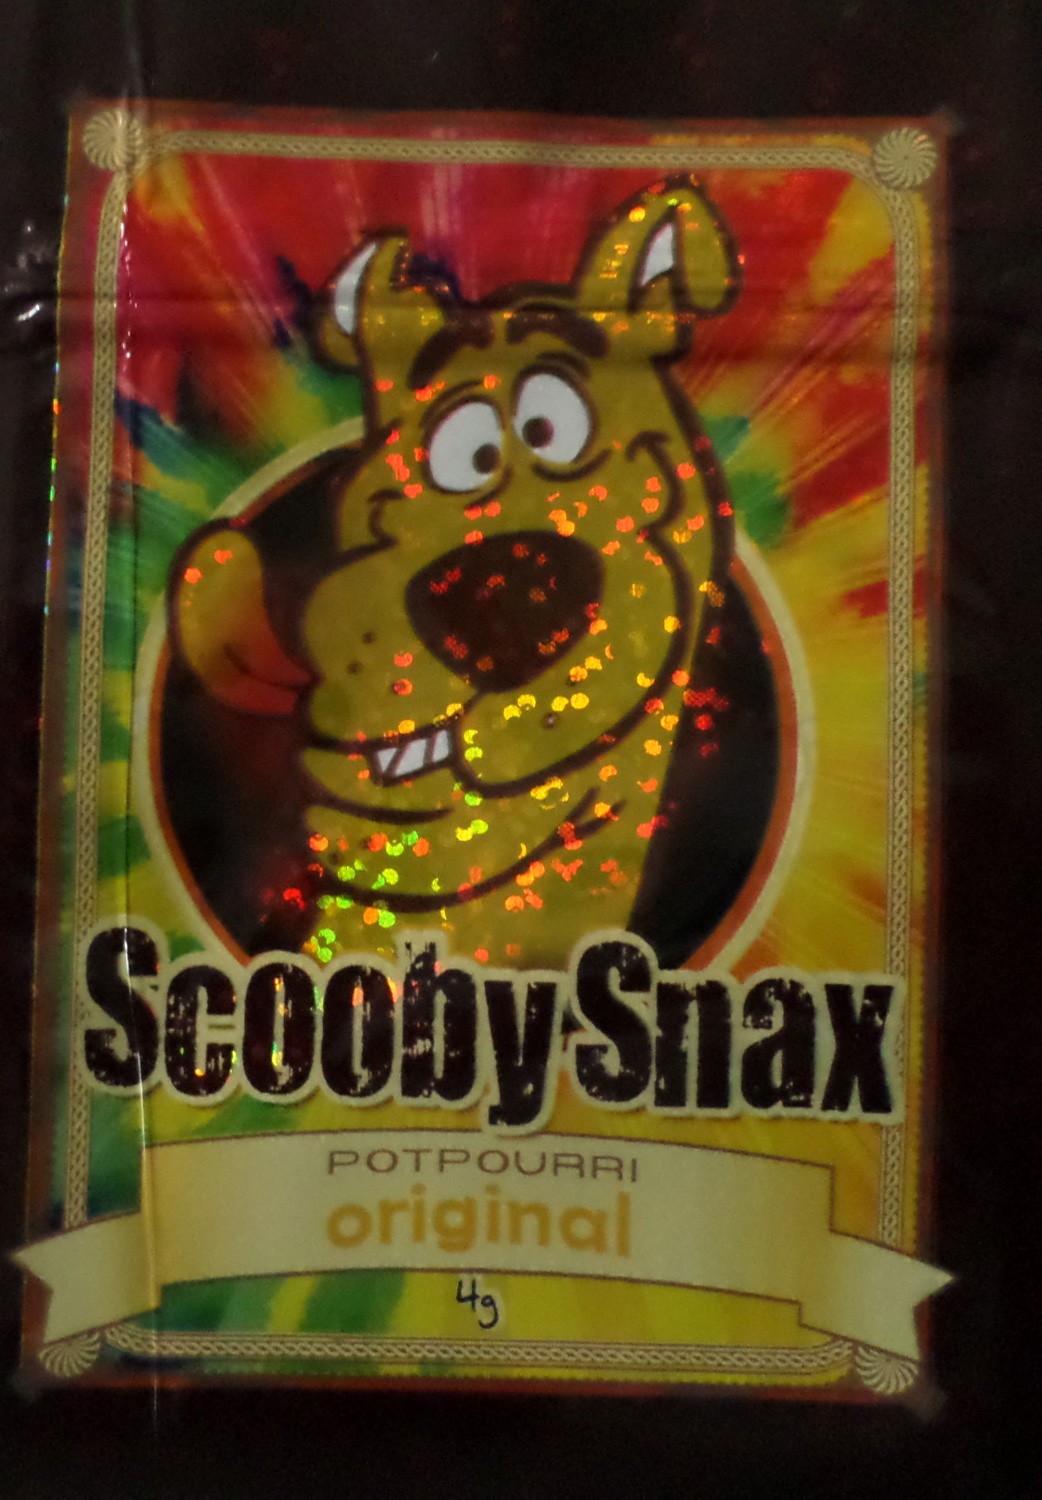 Scooby Snax 2 4g incense 6x pack